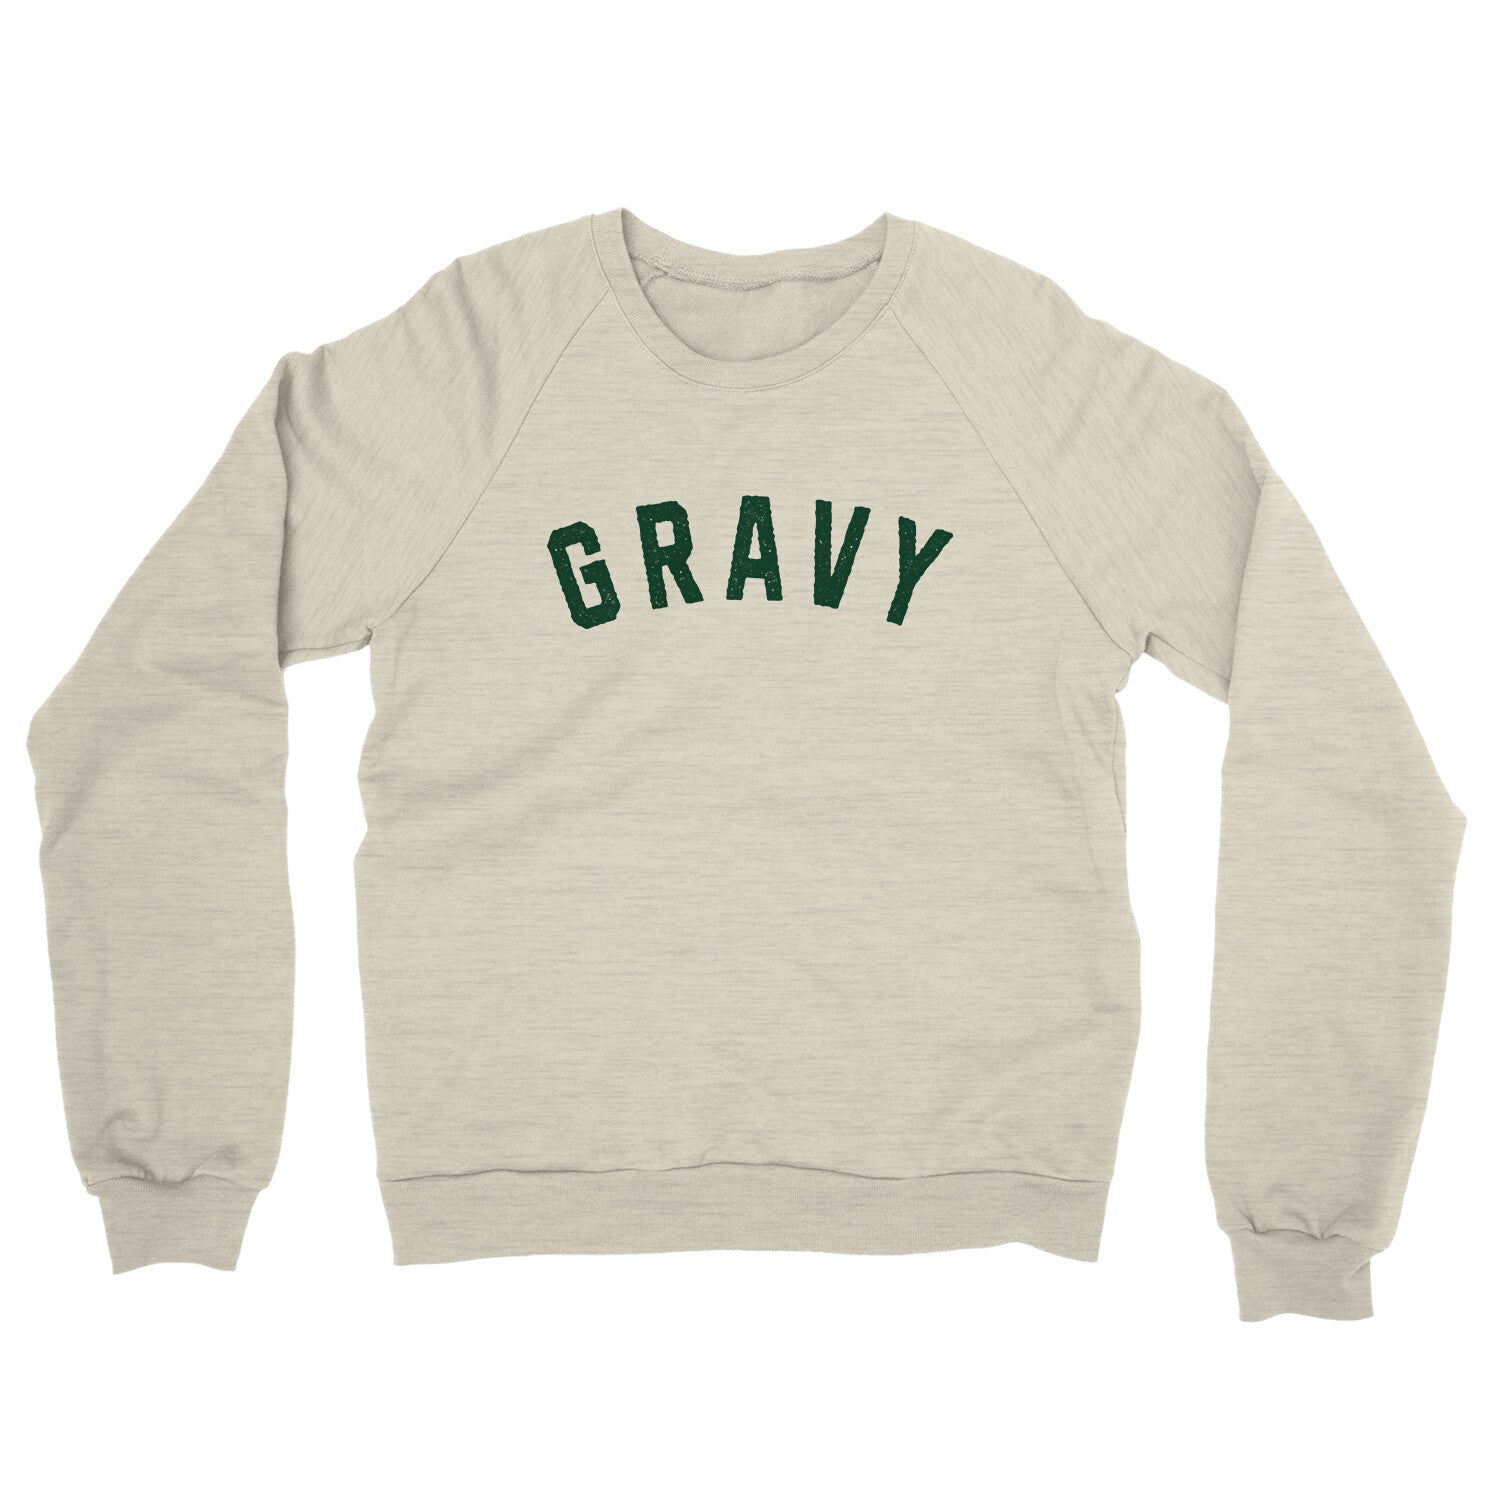 Gravy in Heather Oatmeal Color